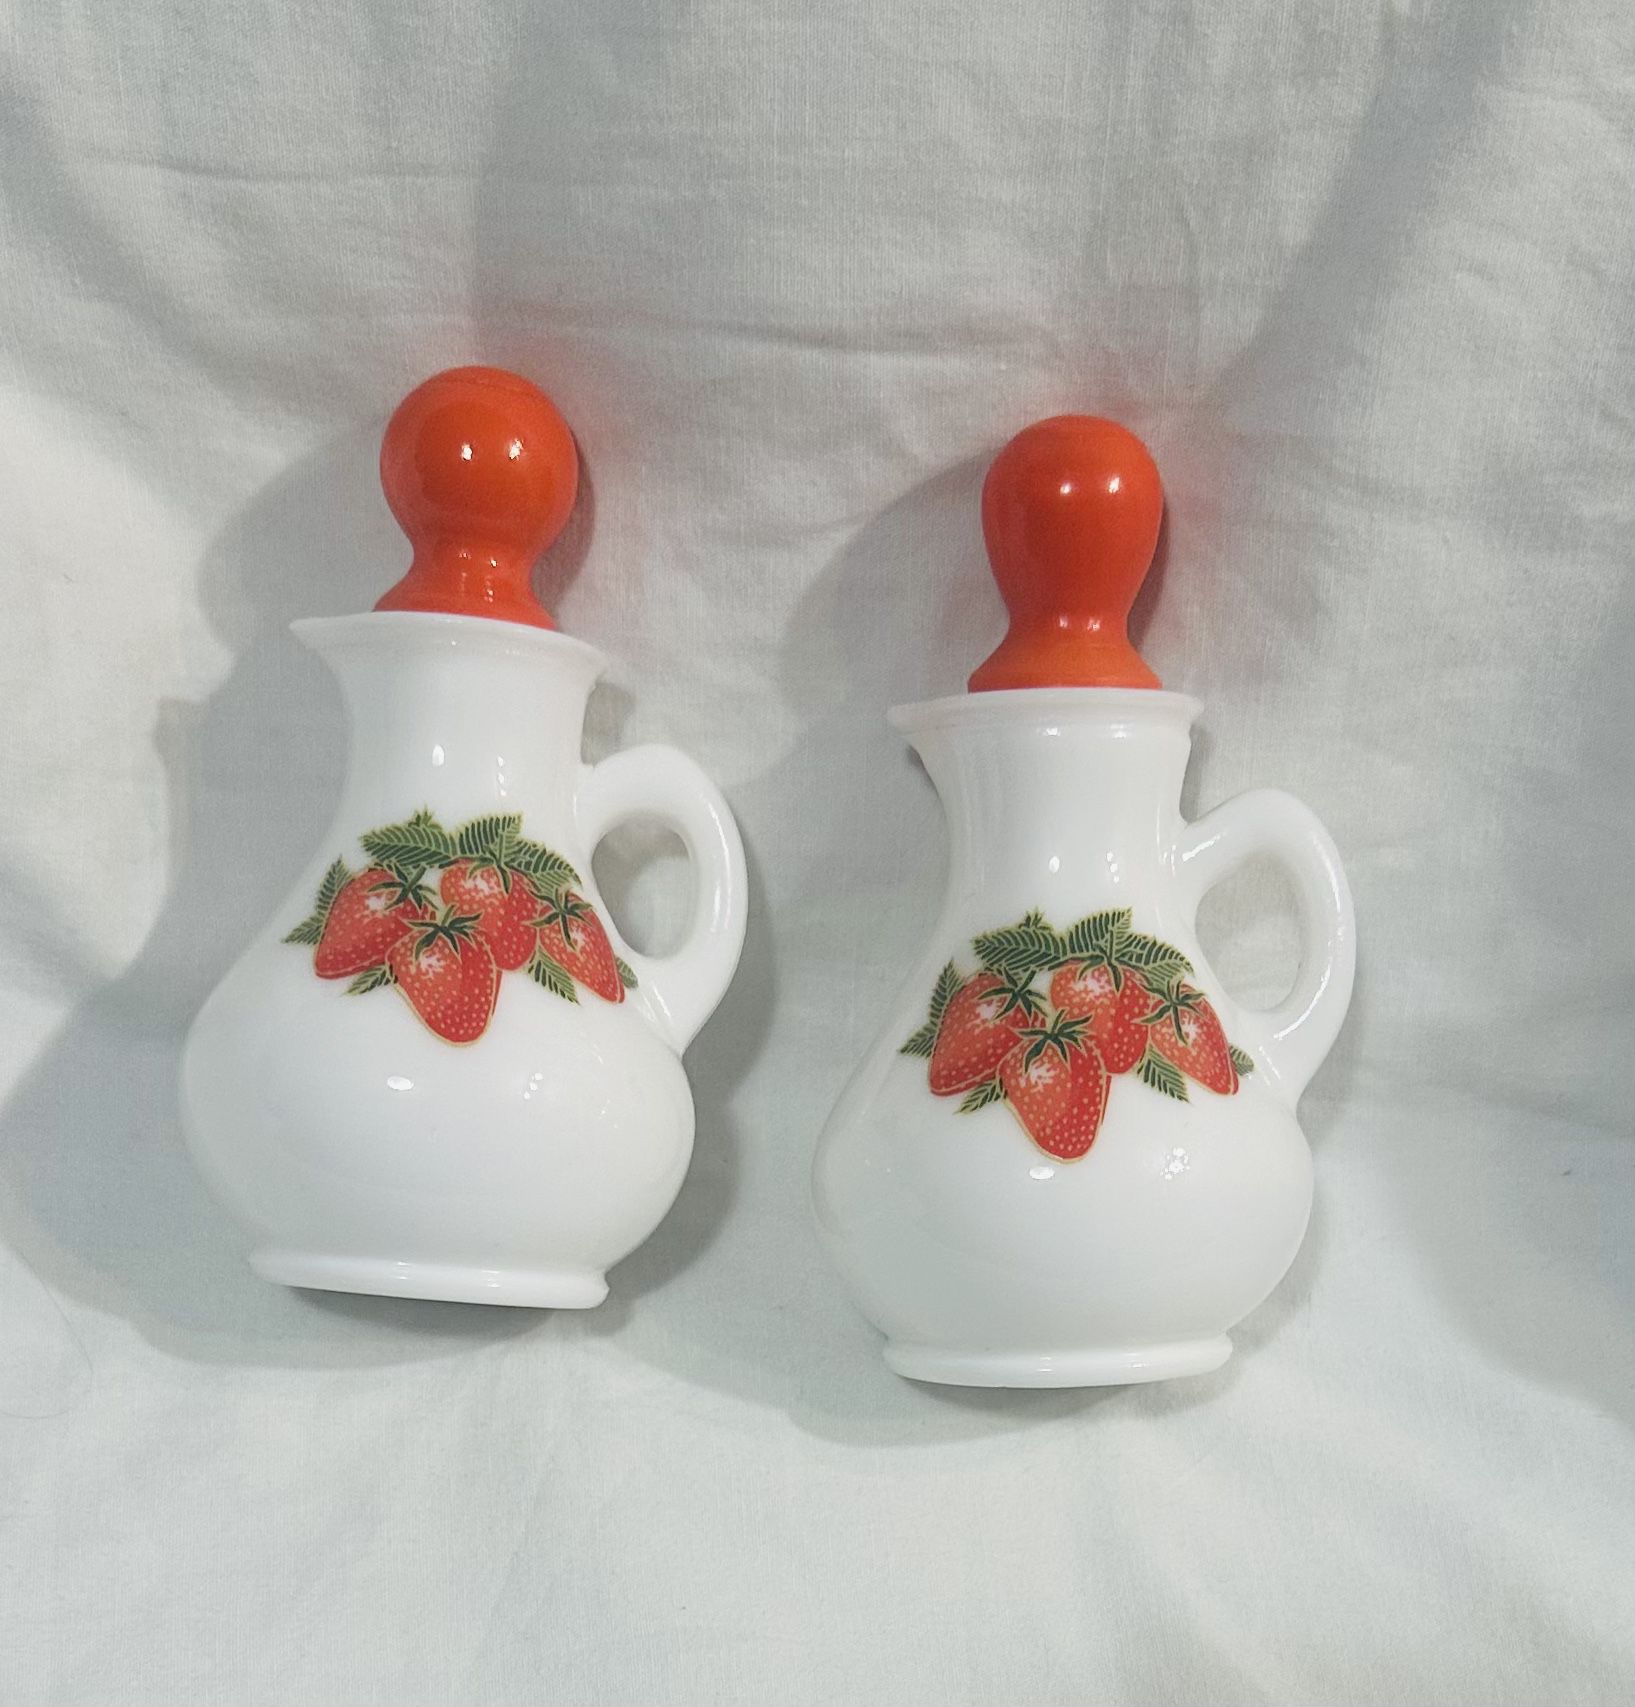 Set of 2 Vintage 1969 Avon Strawberry & Cream Milk Glass Cruets with Stopper Lids. Mini Pitchers. Collectible. Excellent condition, no chips. #1960s #